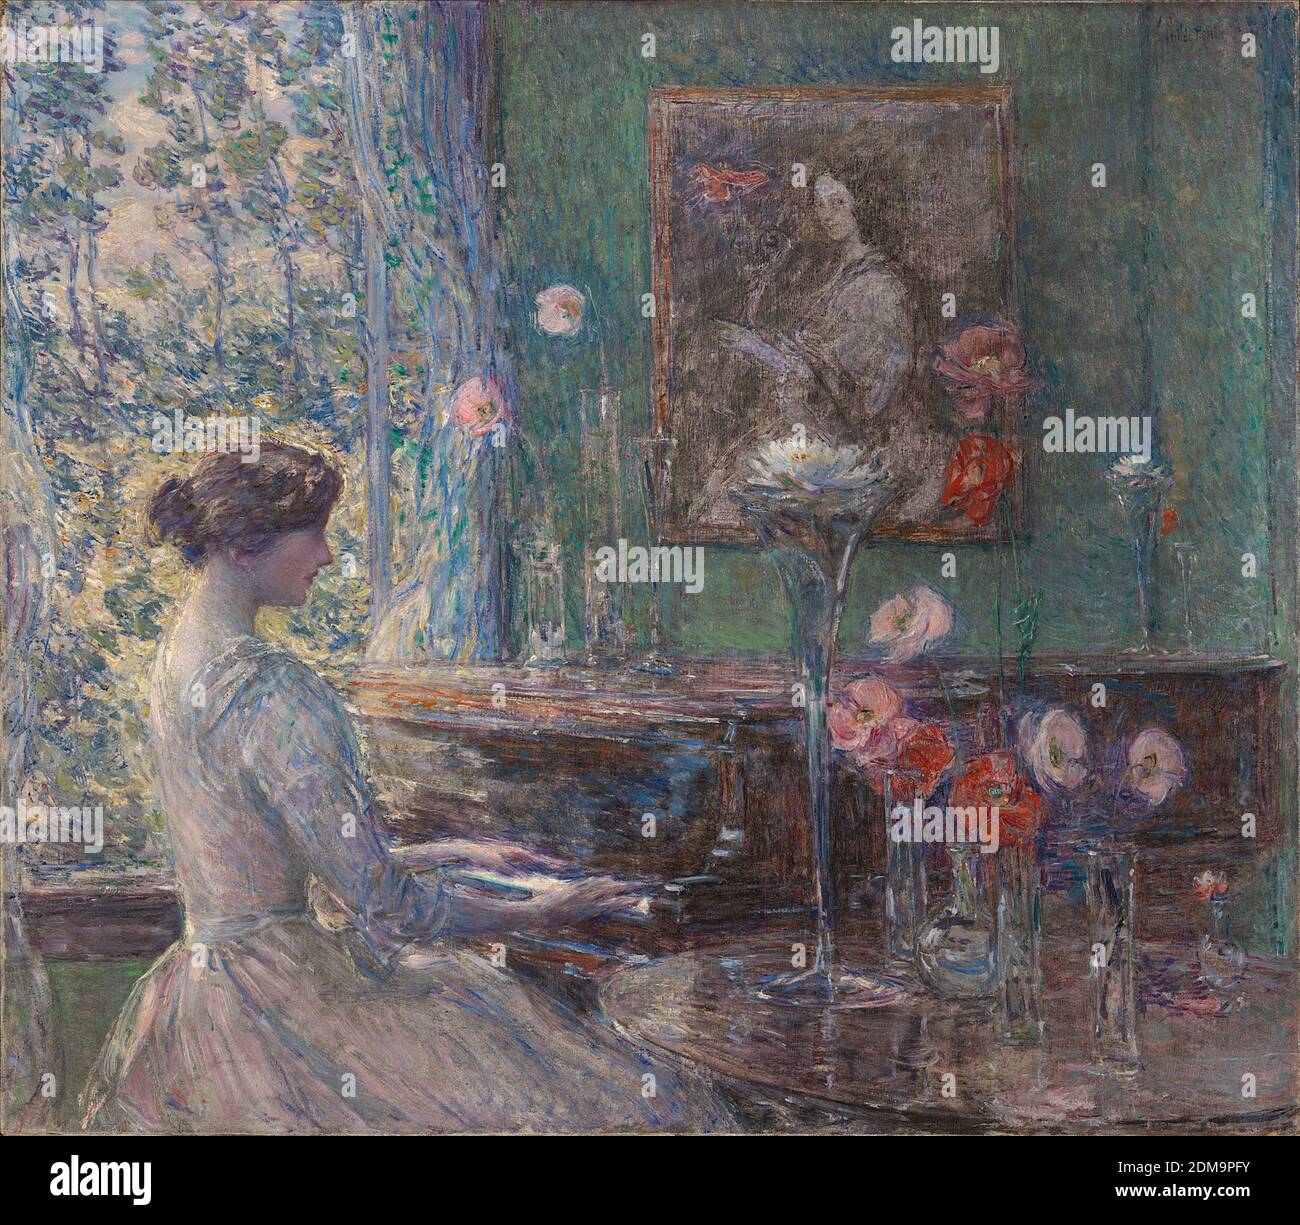 Improvisation1899 American Impressionist Painting by Childe Hassam - Very high resolution and quality image Stock Photo